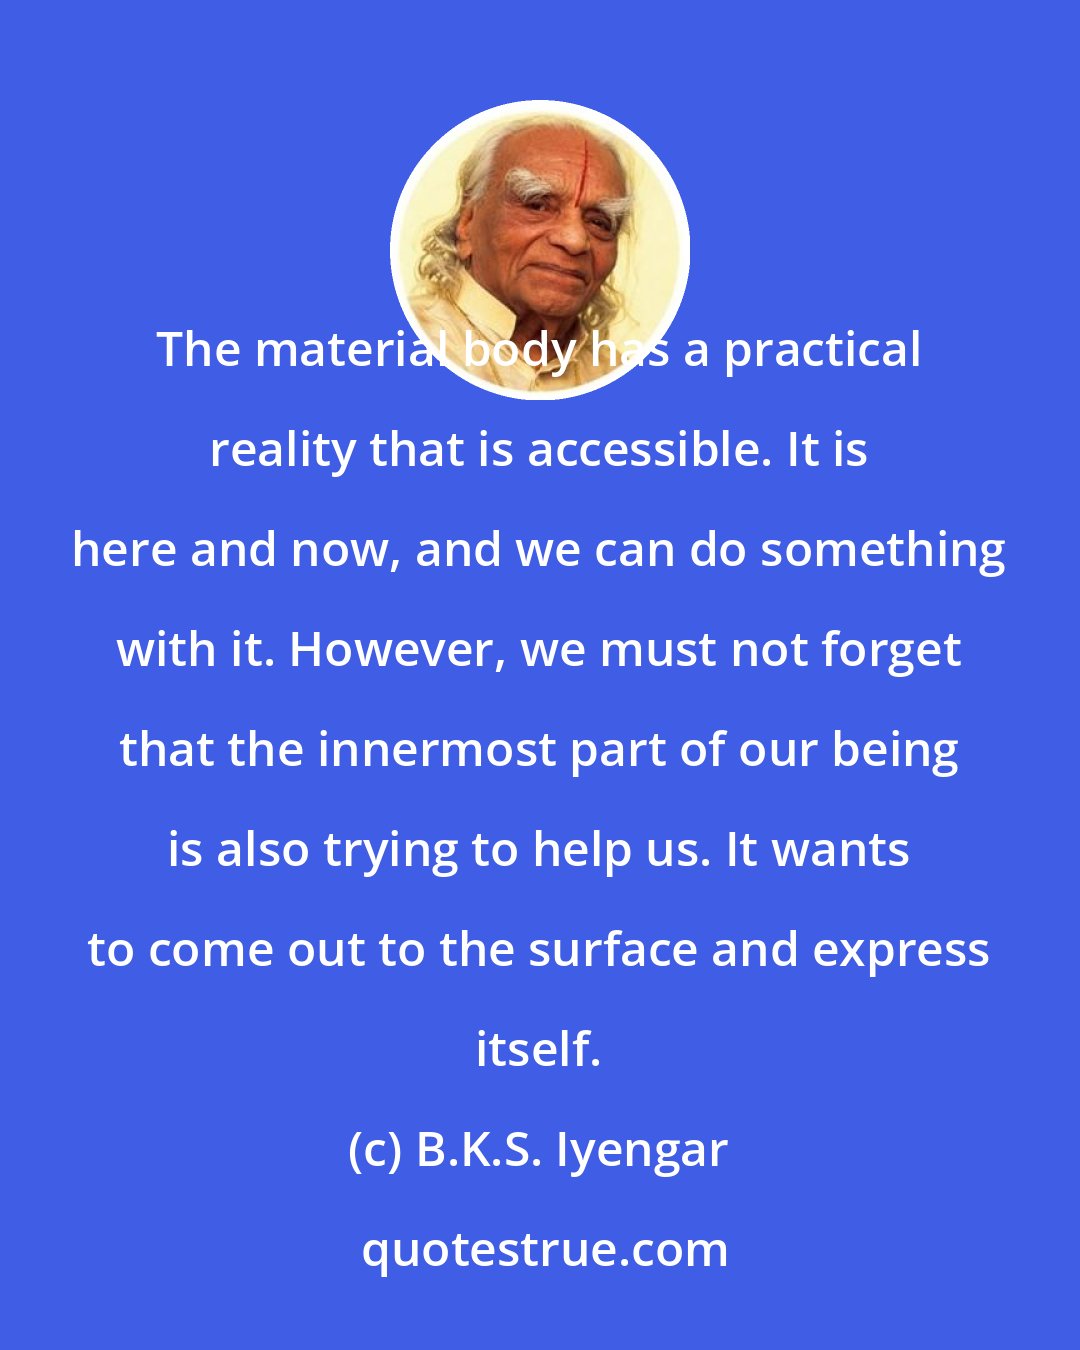 B.K.S. Iyengar: The material body has a practical reality that is accessible. It is here and now, and we can do something with it. However, we must not forget that the innermost part of our being is also trying to help us. It wants to come out to the surface and express itself.